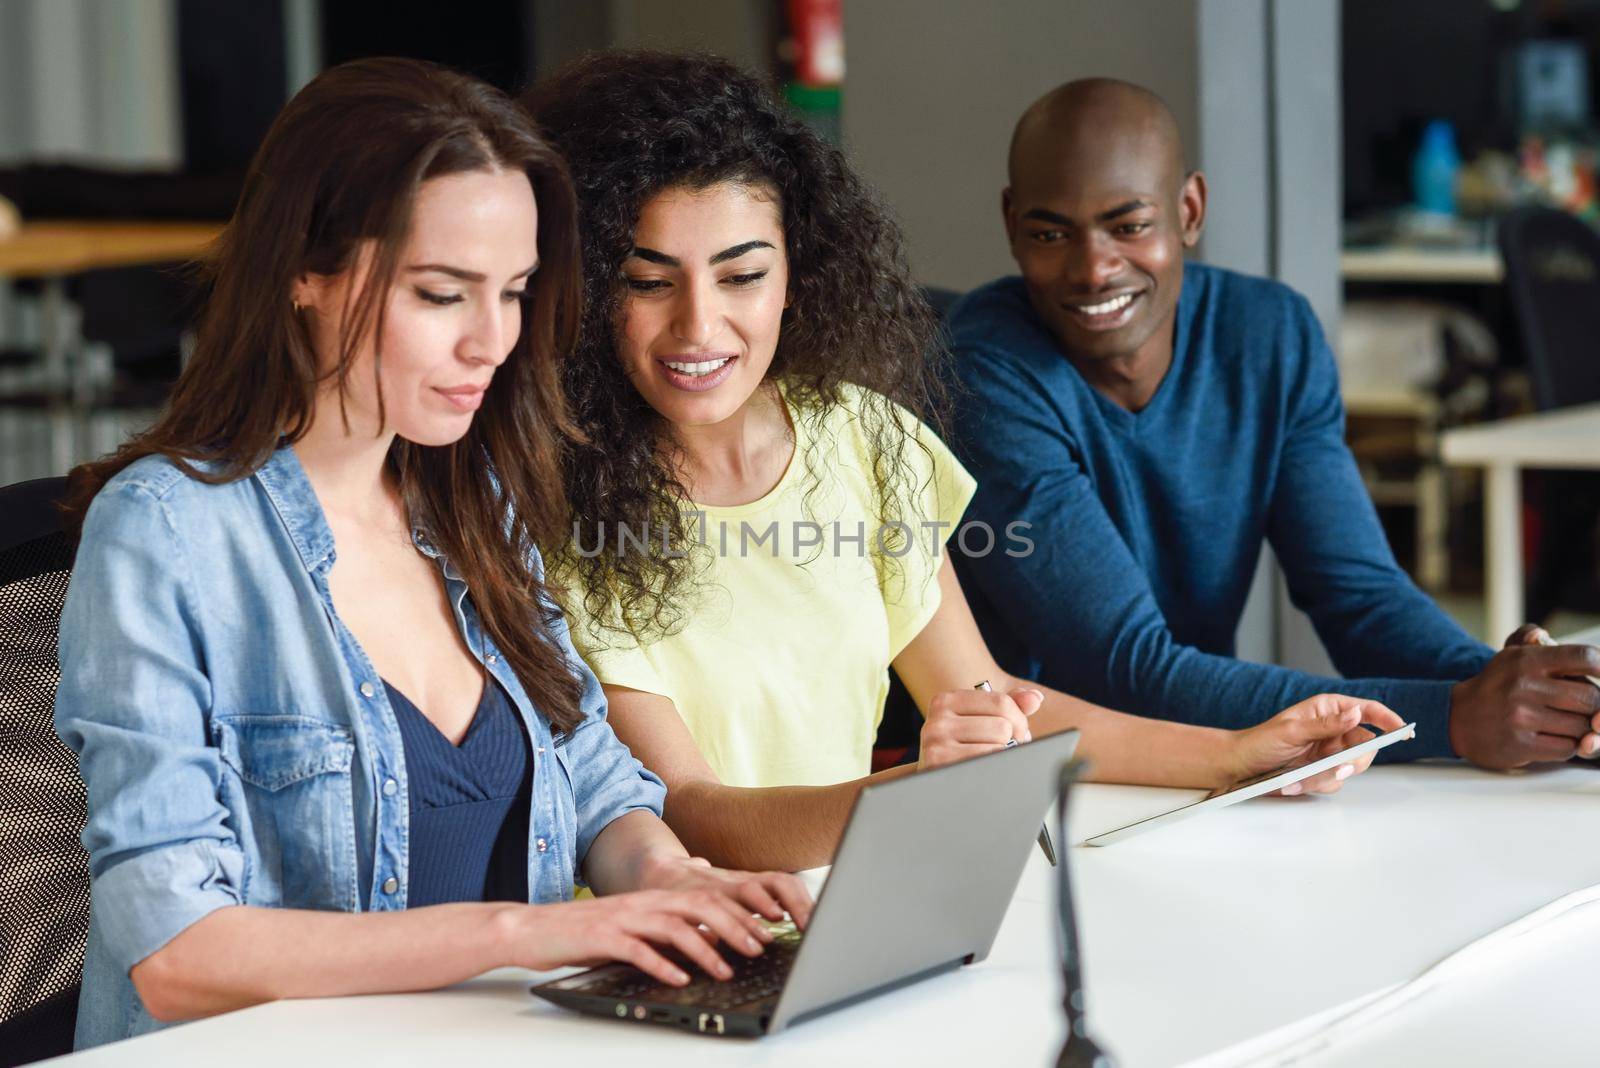 Three young people studying with laptop computer on white desk. Beautiful girls and man working toghether wearing casual clothes. Multi-ethnic group.